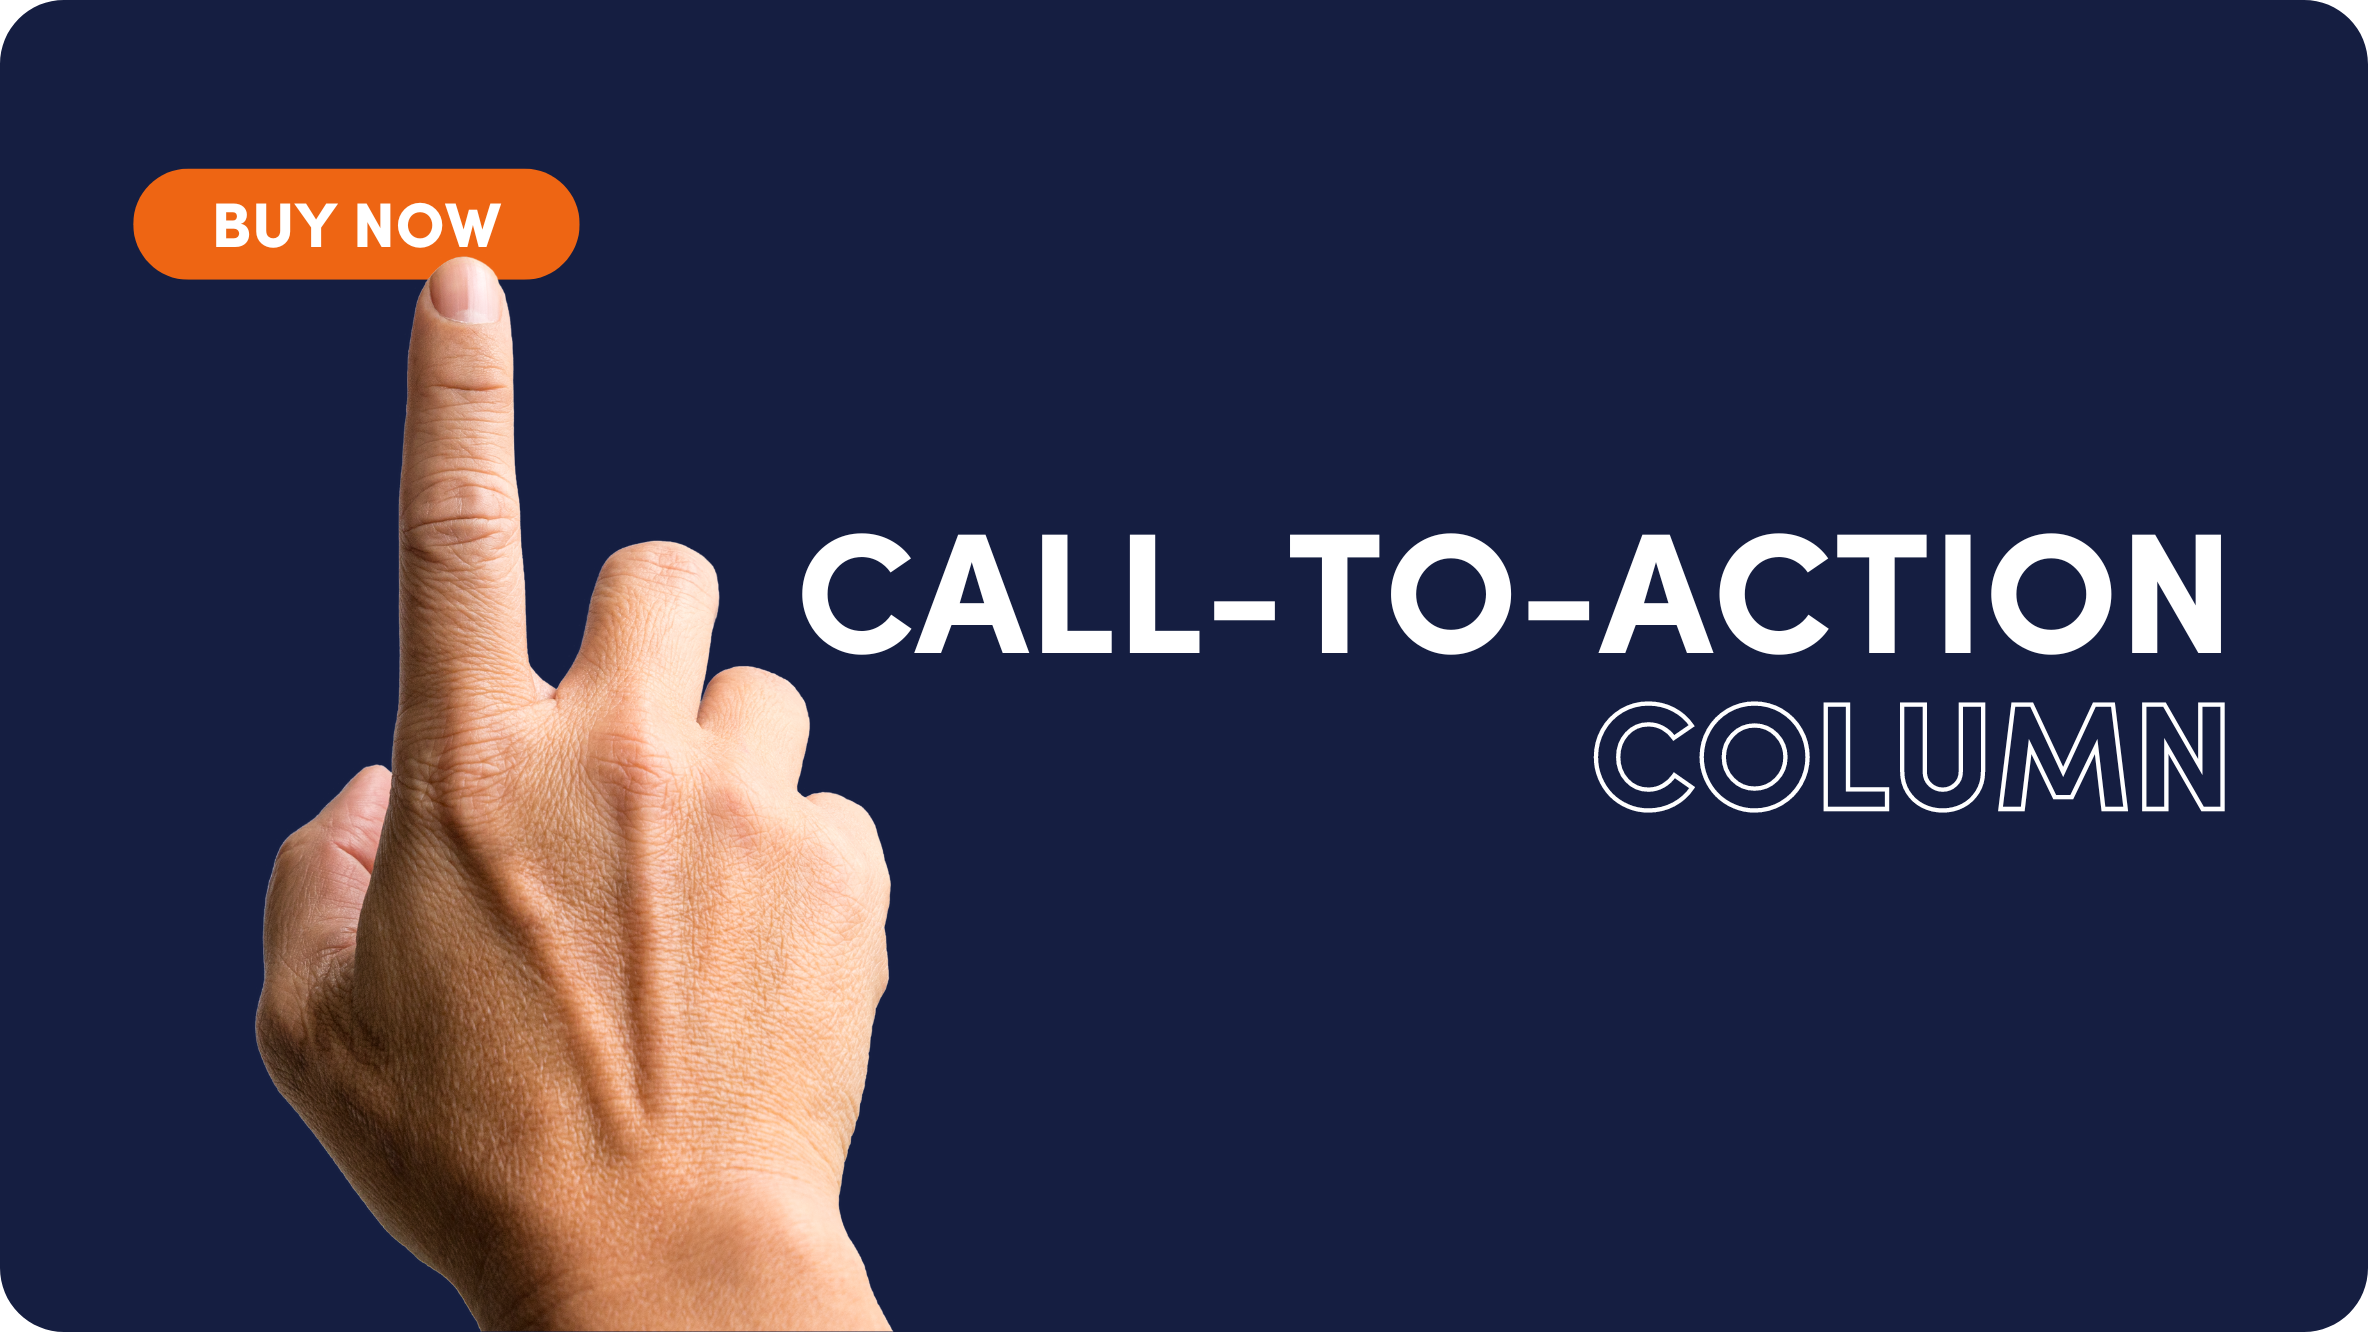 Call-To-Action Column Added to Content Grid